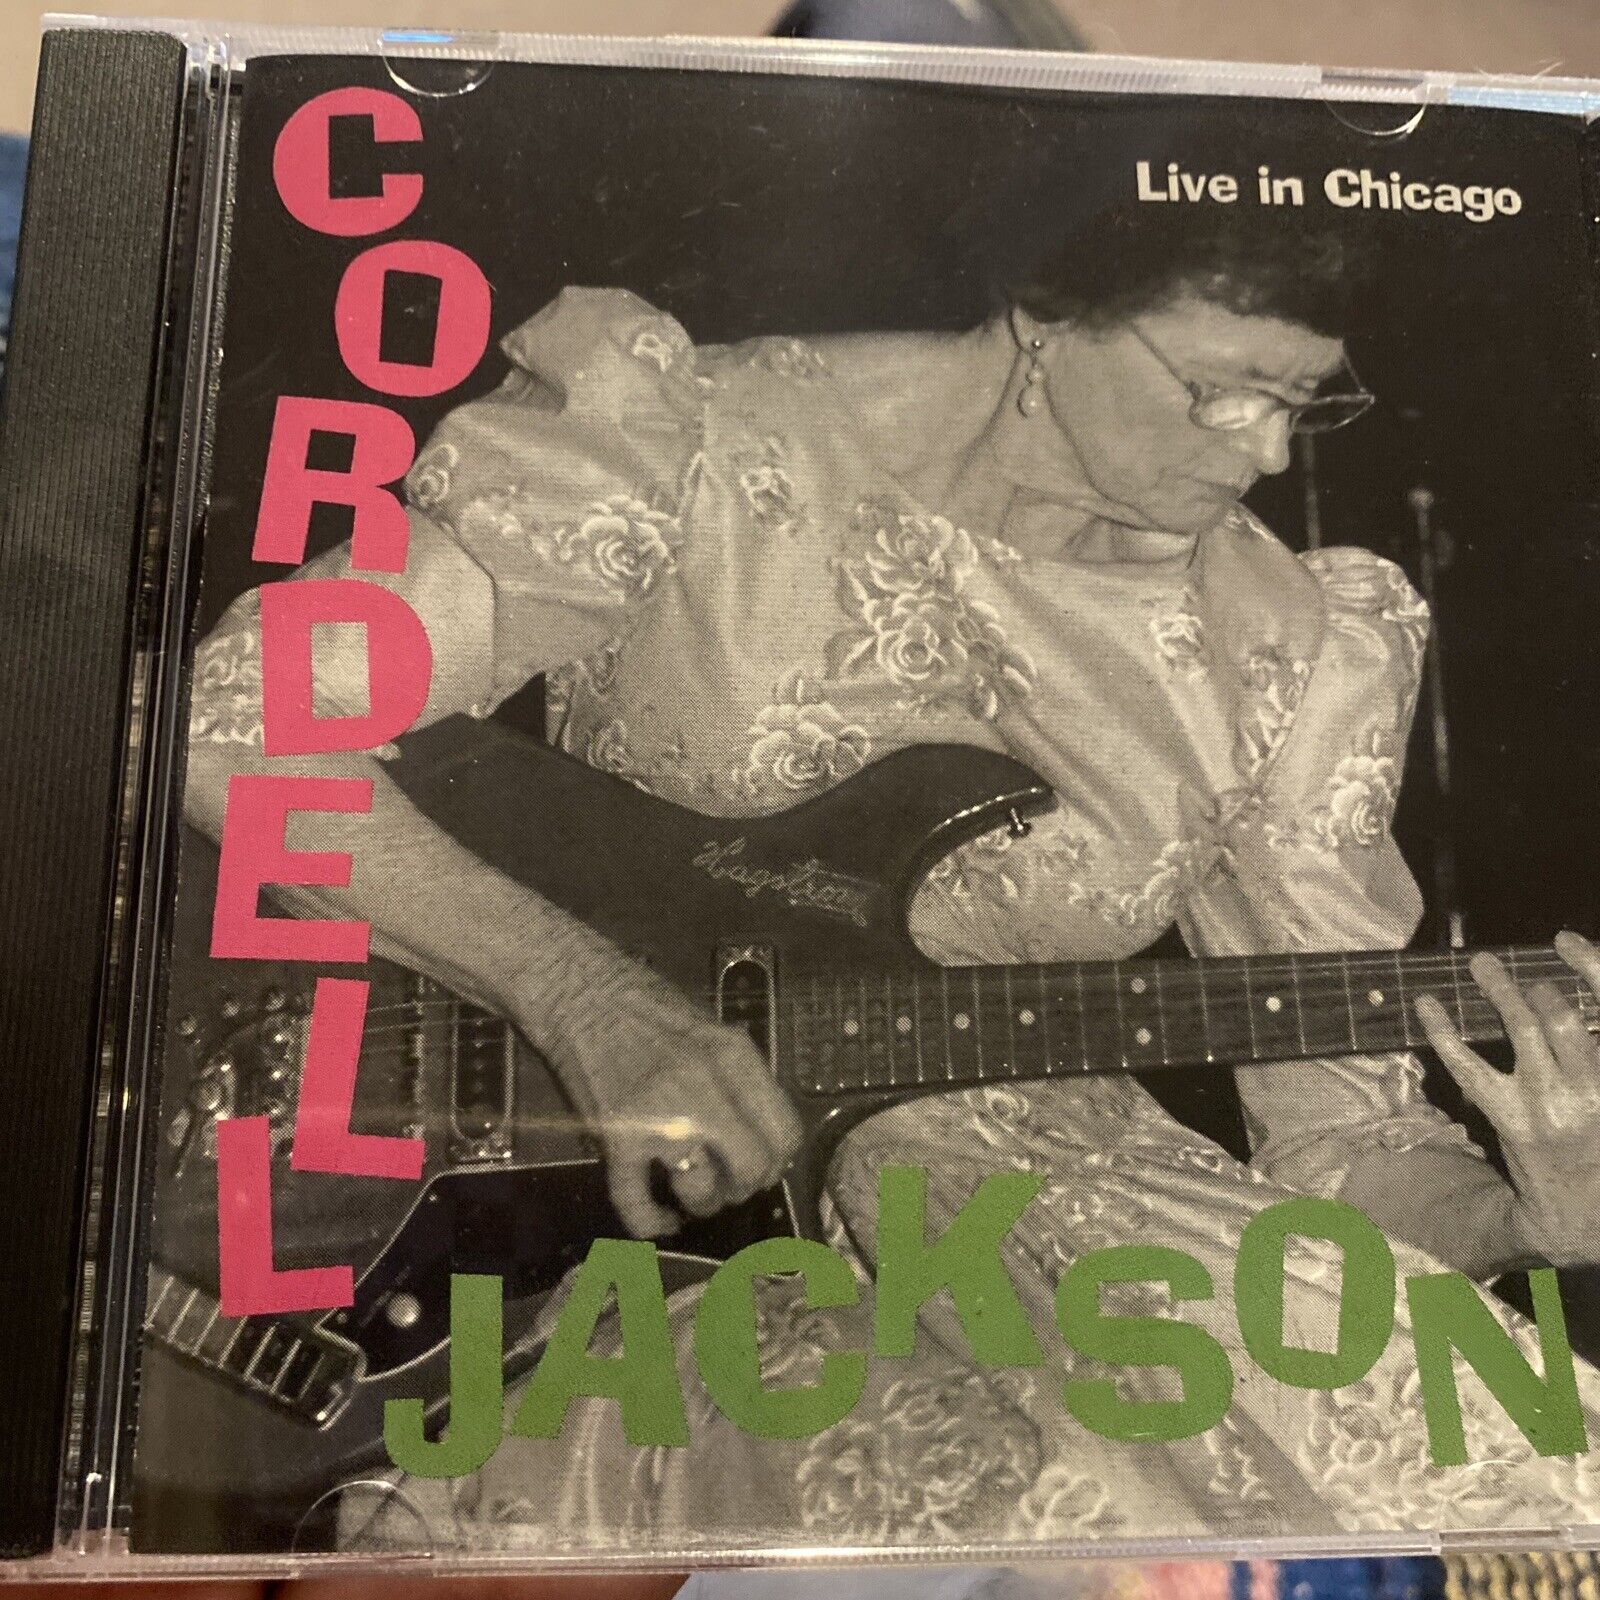 Live in Chicago by Jackson, Cordell (CD, 1997)